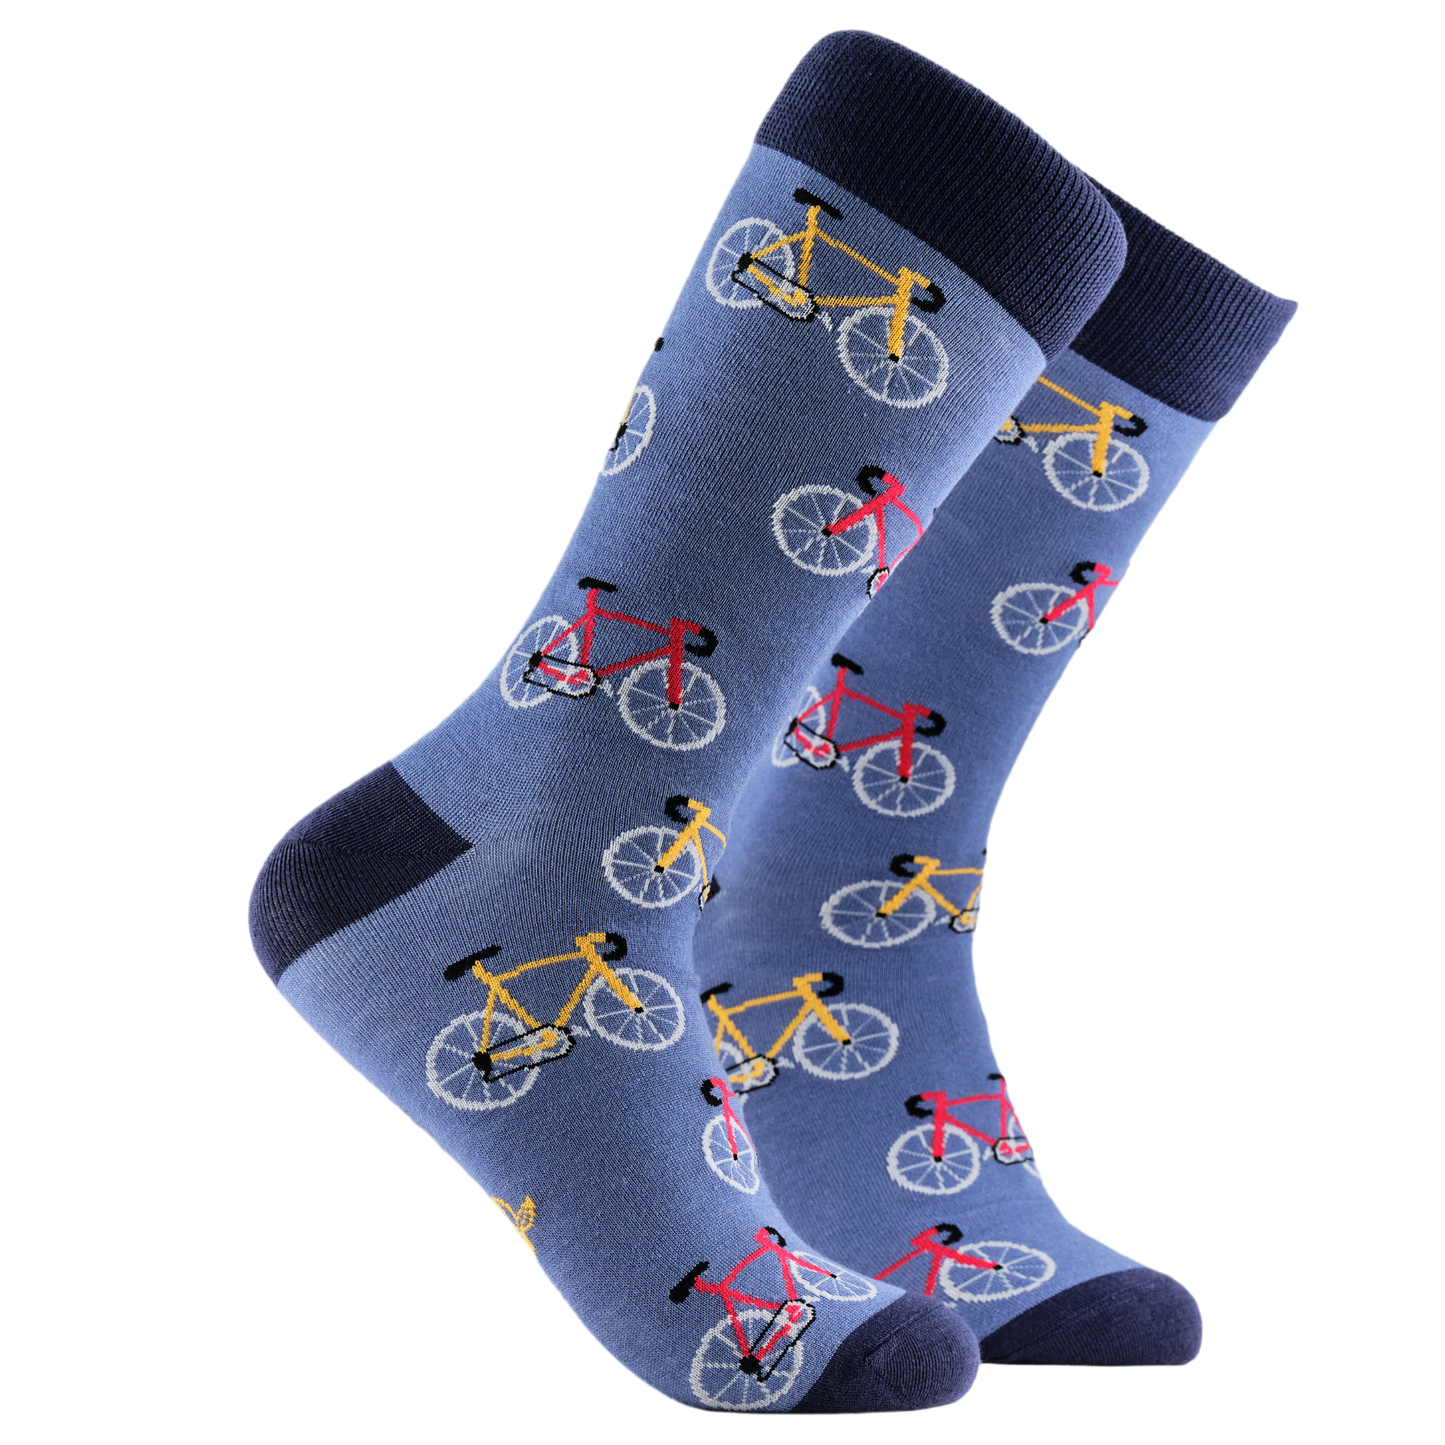 Wheels Bamboo Socks. A pair of socks depicting red and yellow bikes. Blue legs, dark blue cuff, heel and toe.